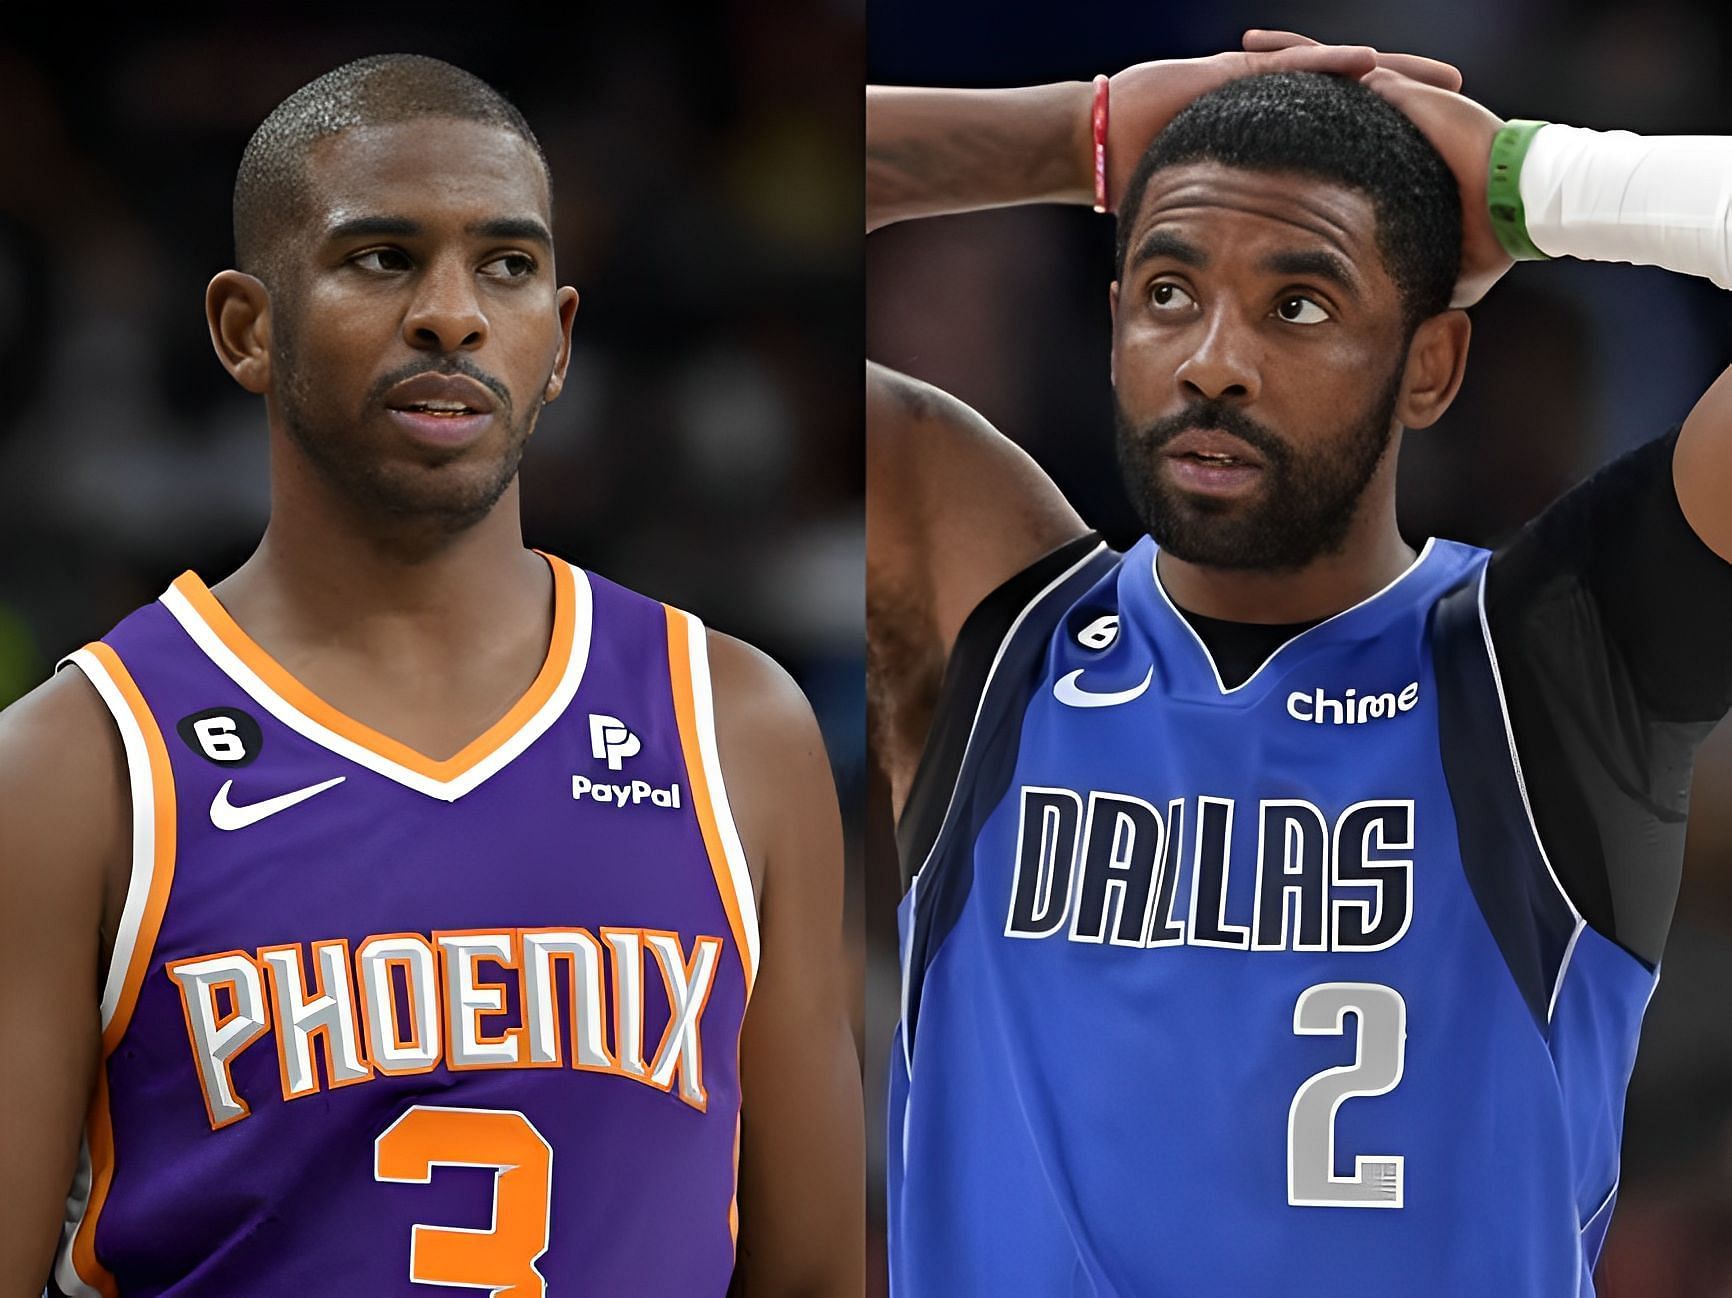 Phoenix Suns and Dallas Mavericks star point guards Chris Paul and Kyrie Irving